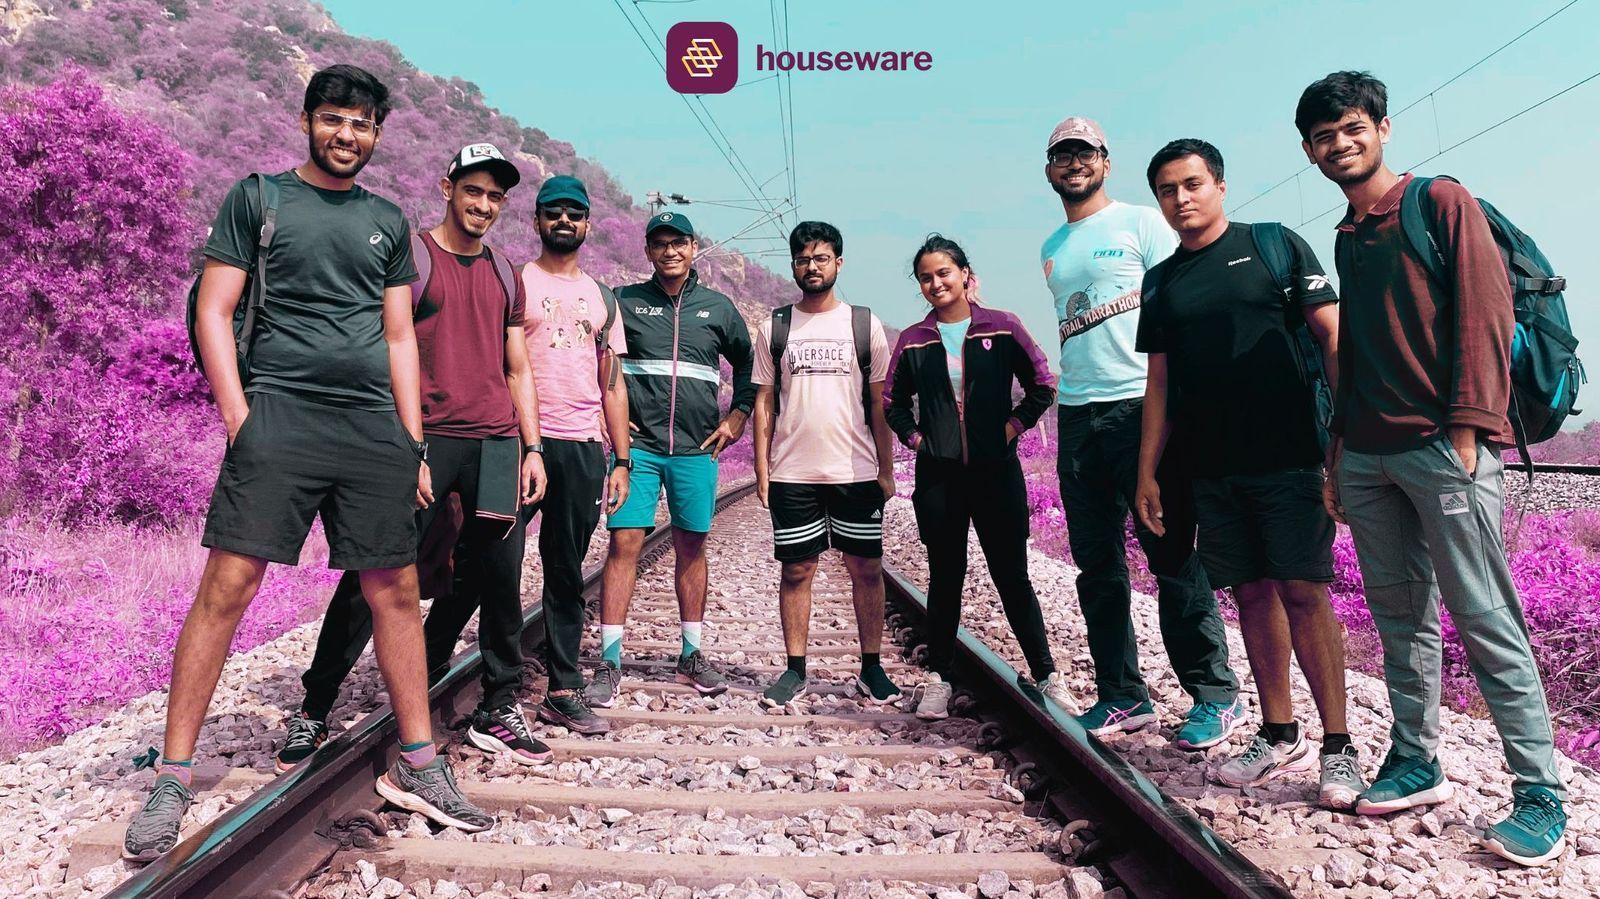 SaaS startup Houseware raises seed funding of $2.1 million to expand its operations